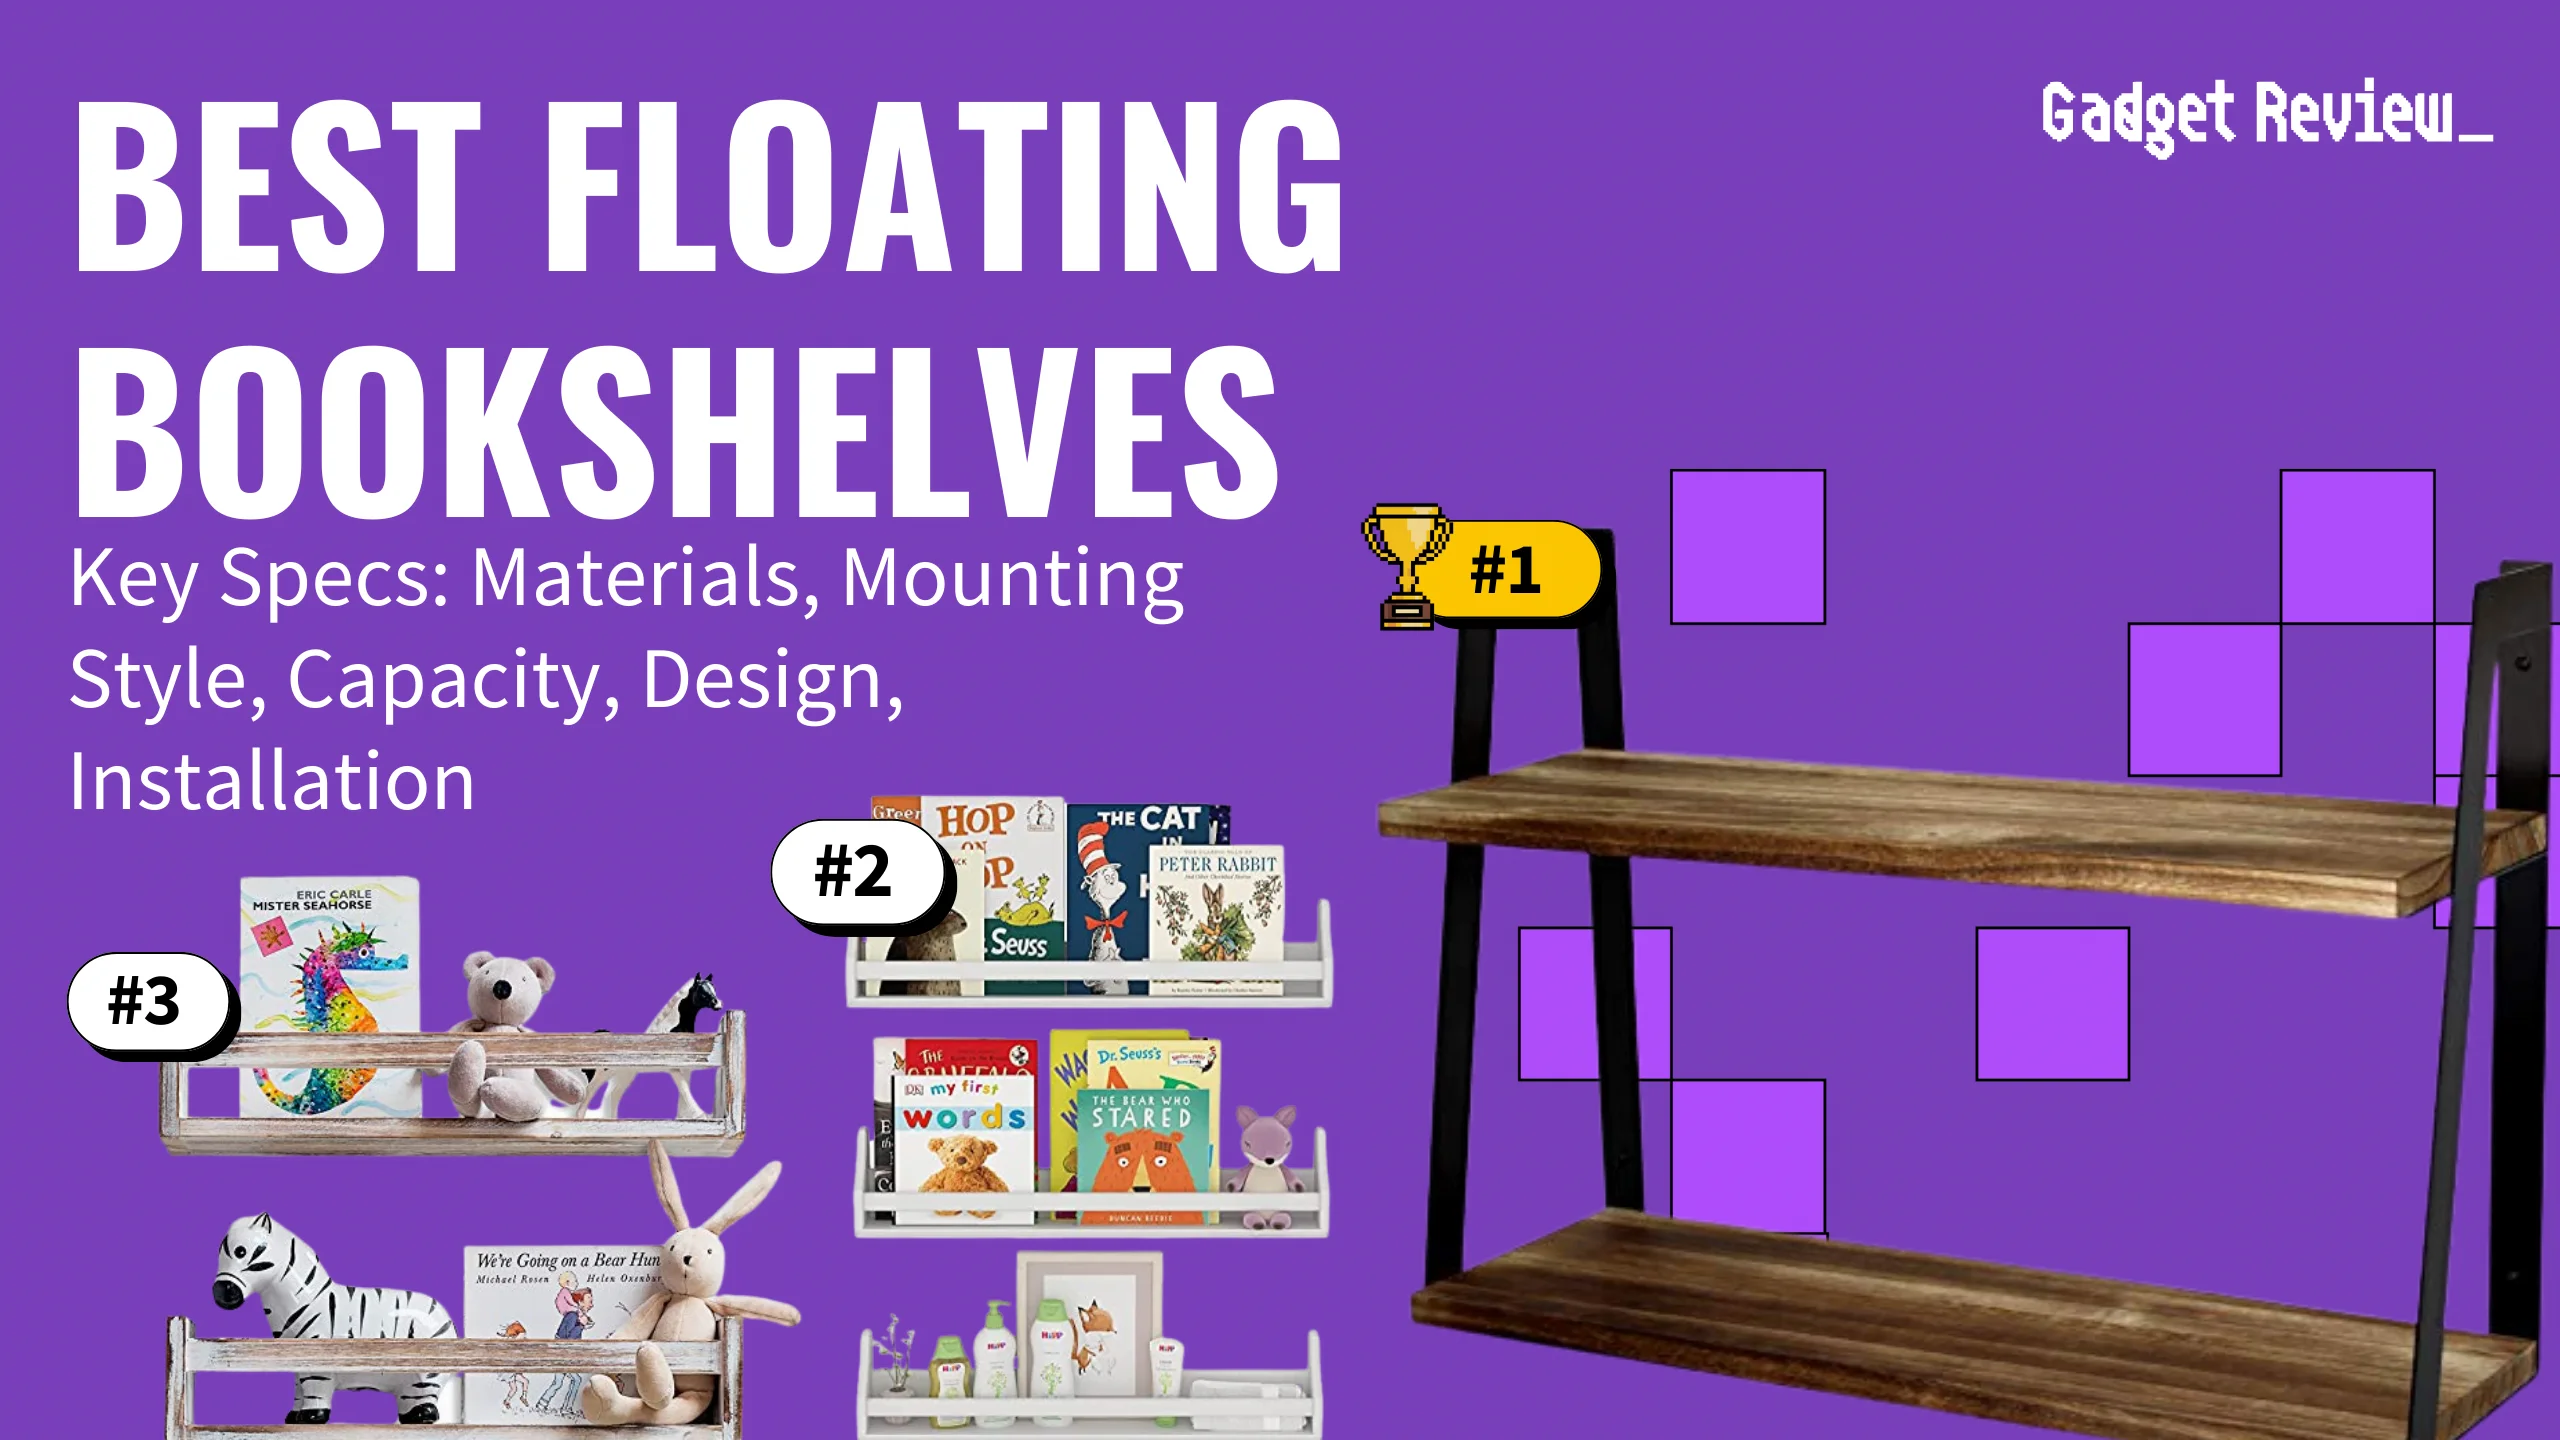 5” Small Floating Shelf, Adhesive & Screw in, for Bluetooth Speakers, Cameras, Plants, Books, Toys & More, Universal Shelves, Easy to Install